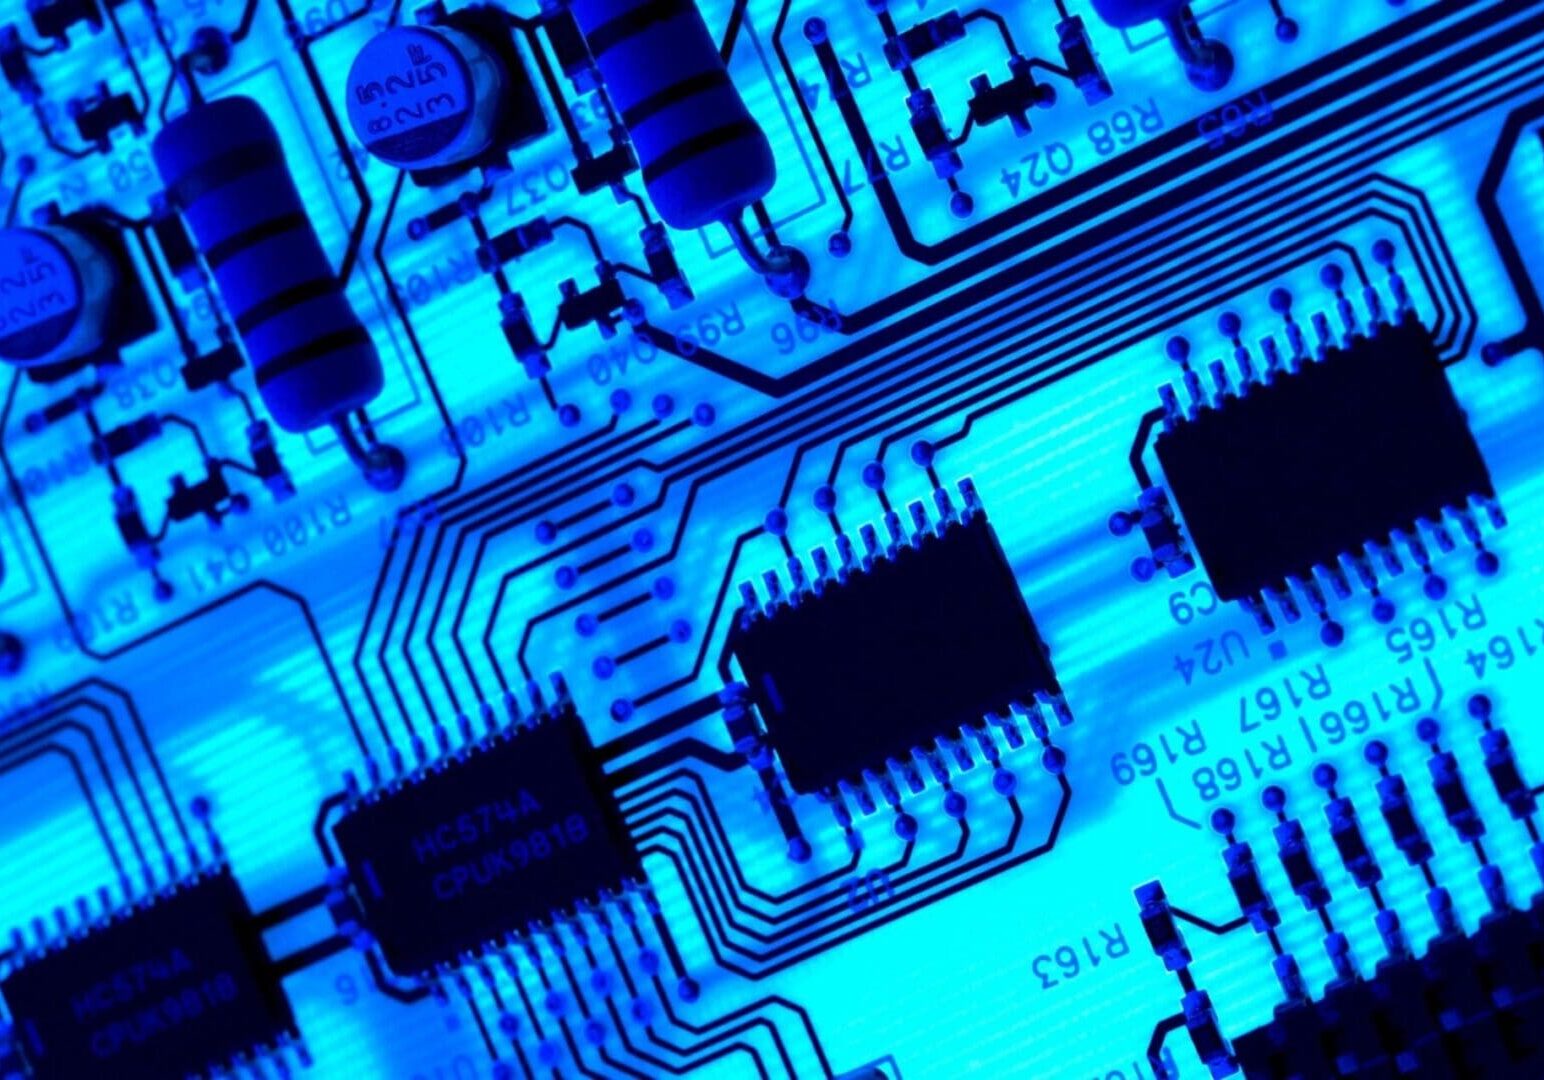 Close-up of a blue-lit circuit board featuring microchips and capacitors, showcasing detailed electronic components.